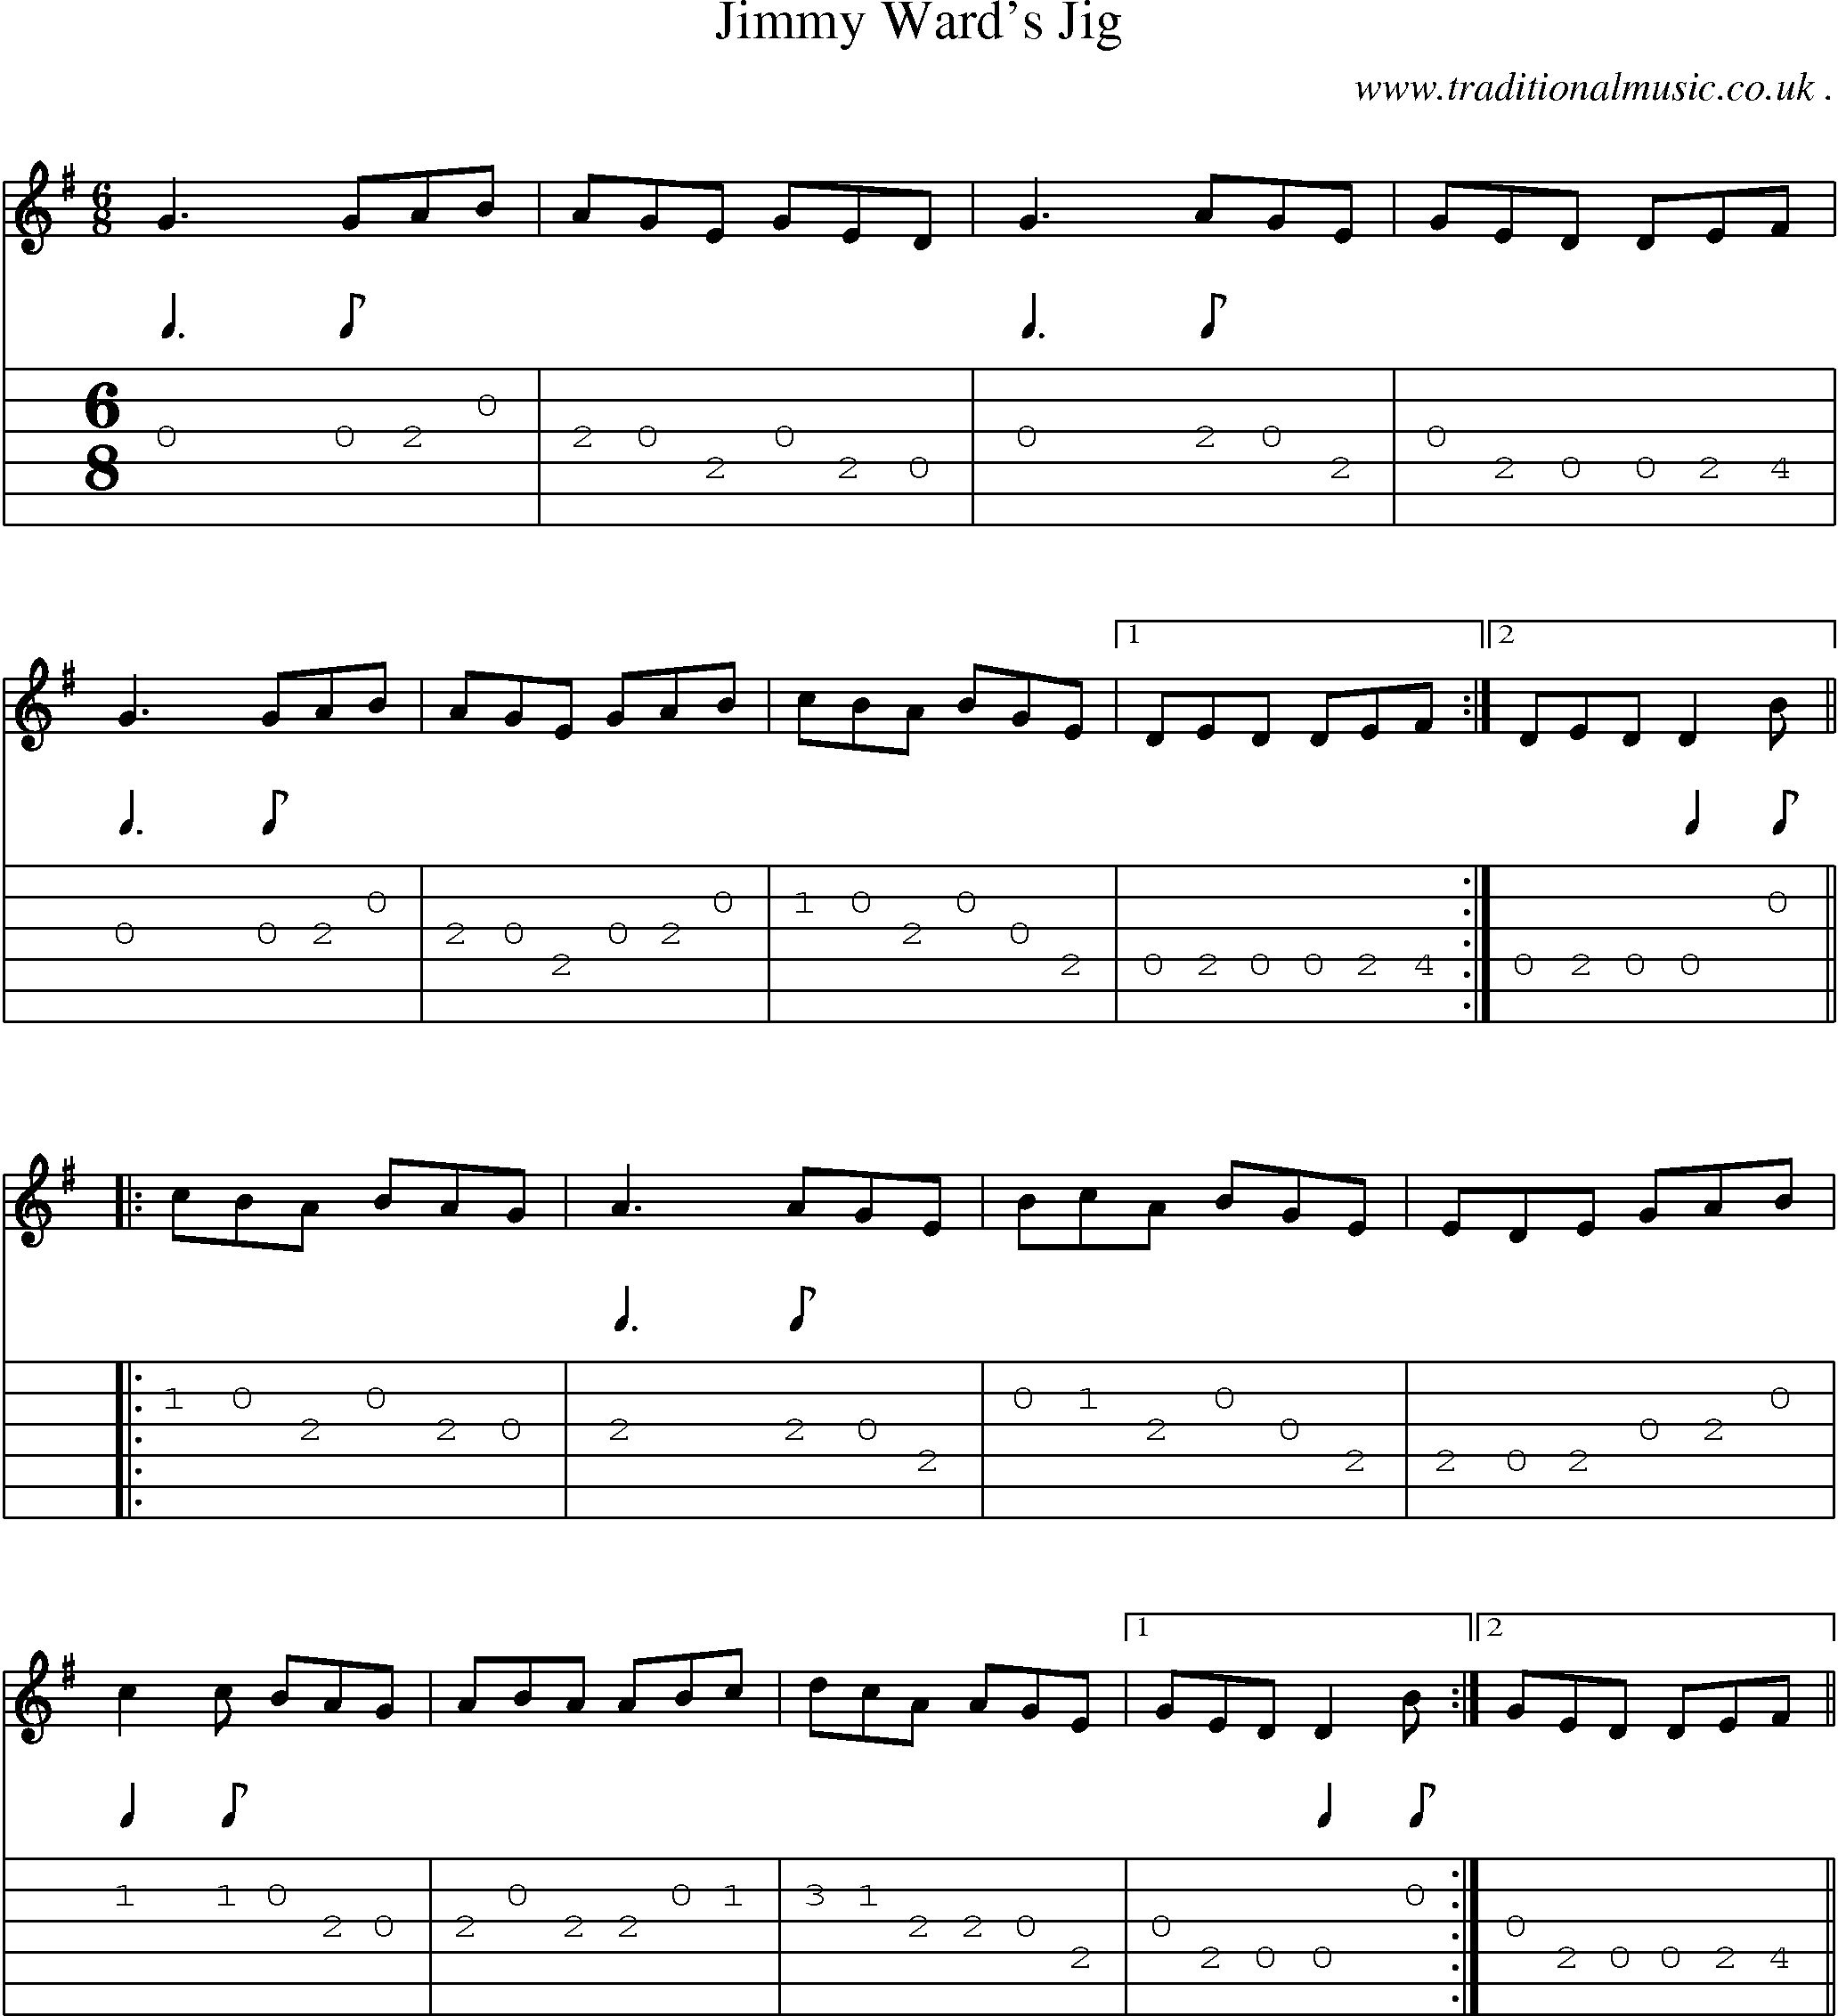 Sheet-Music and Guitar Tabs for Jimmy Wards Jig